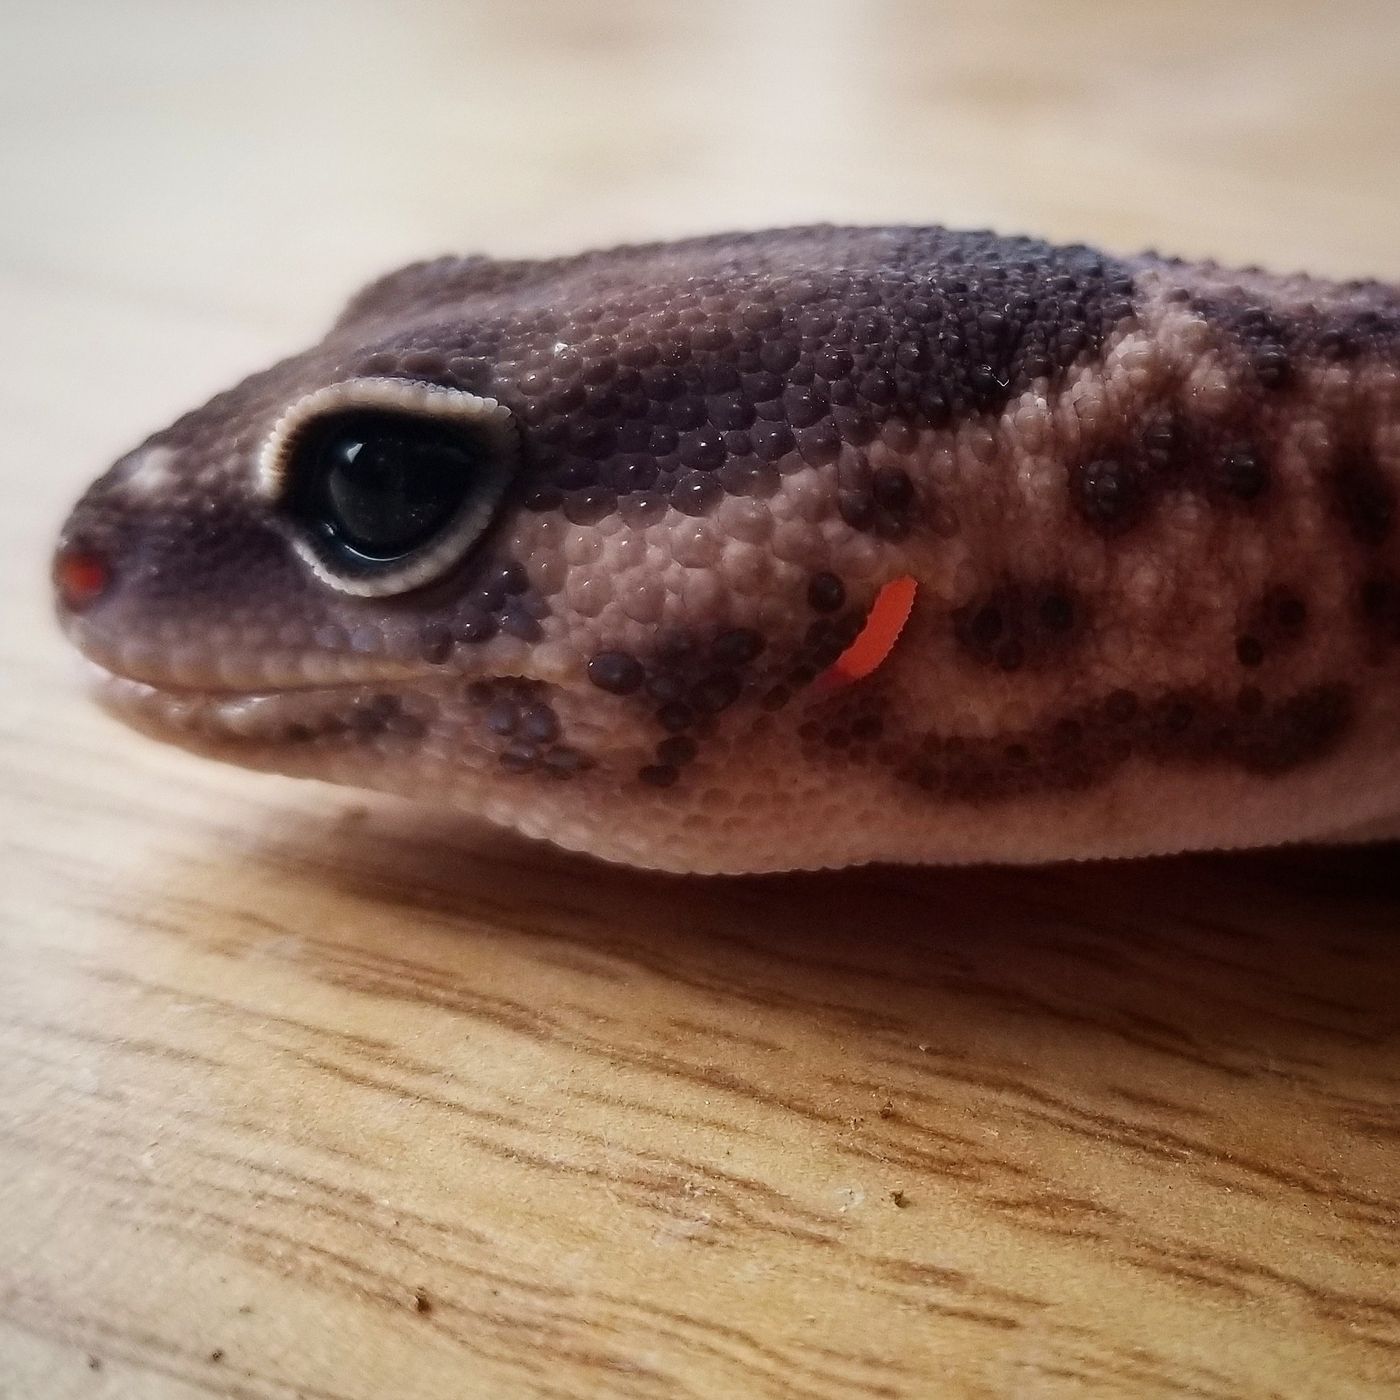 Episode 3: Fat-tailed Gecko